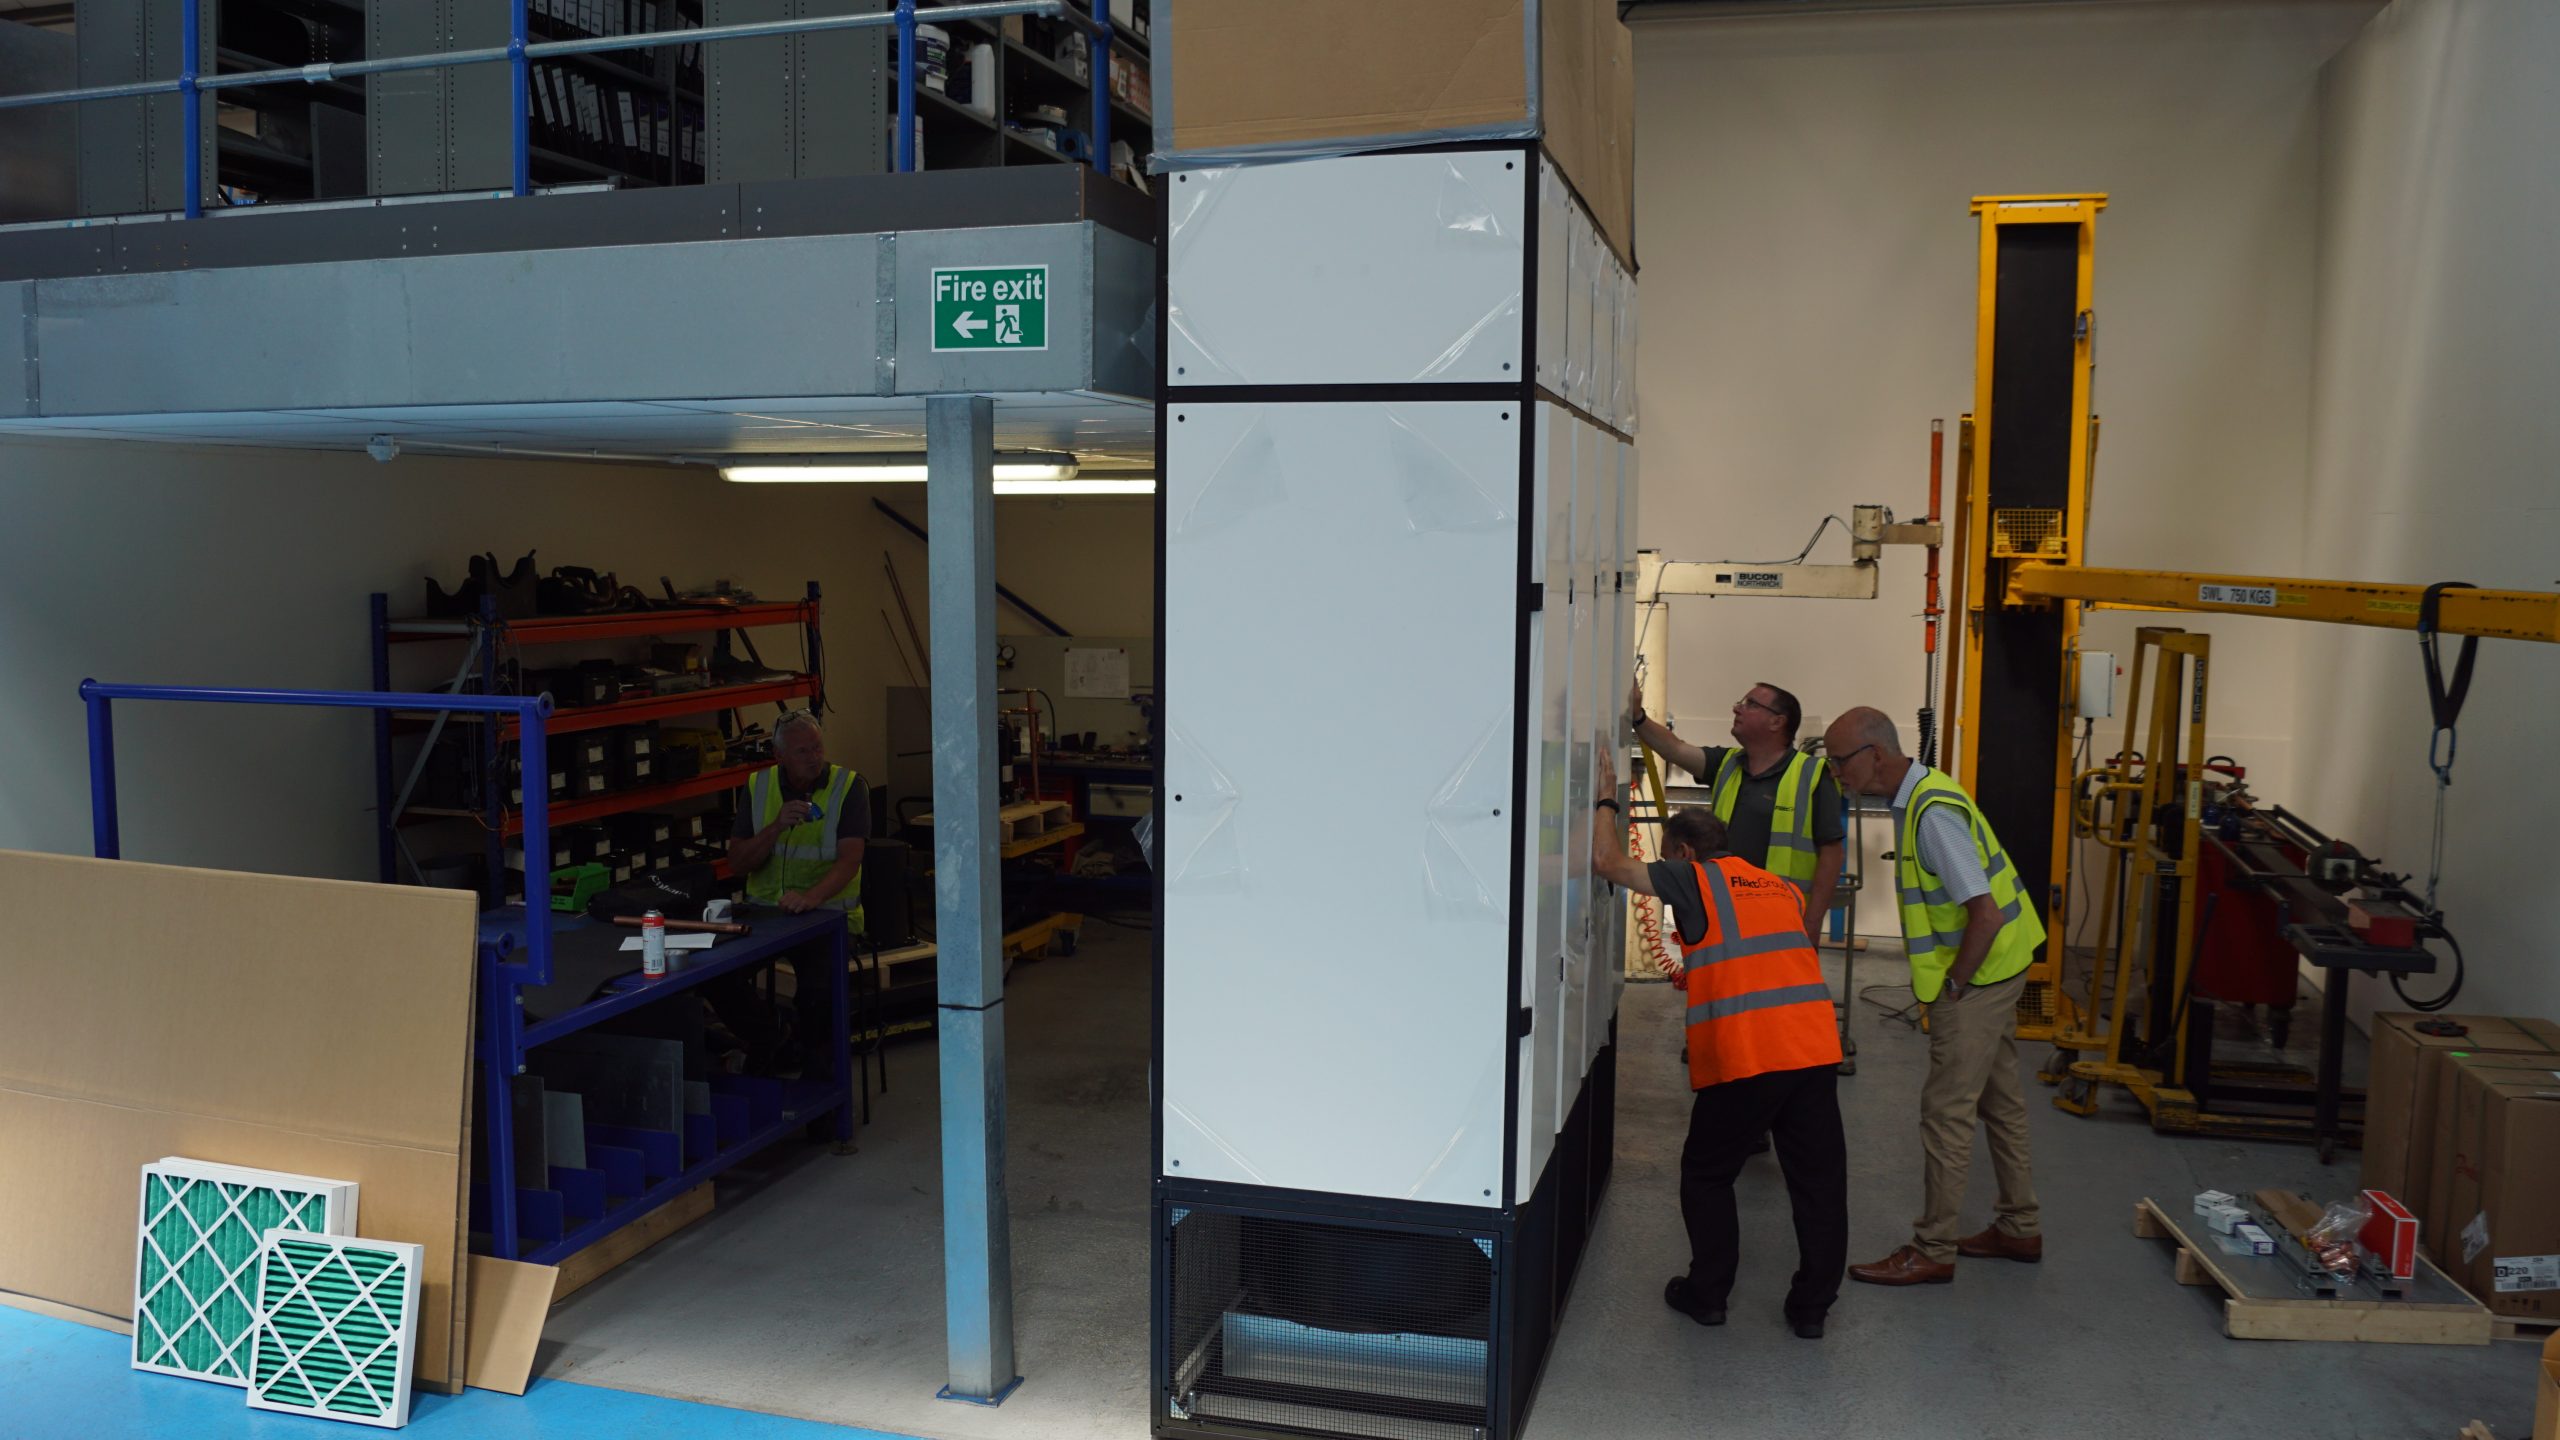 NEWS | Herefordshire based company are finalists for Data Centre Cooling innovation of the year award